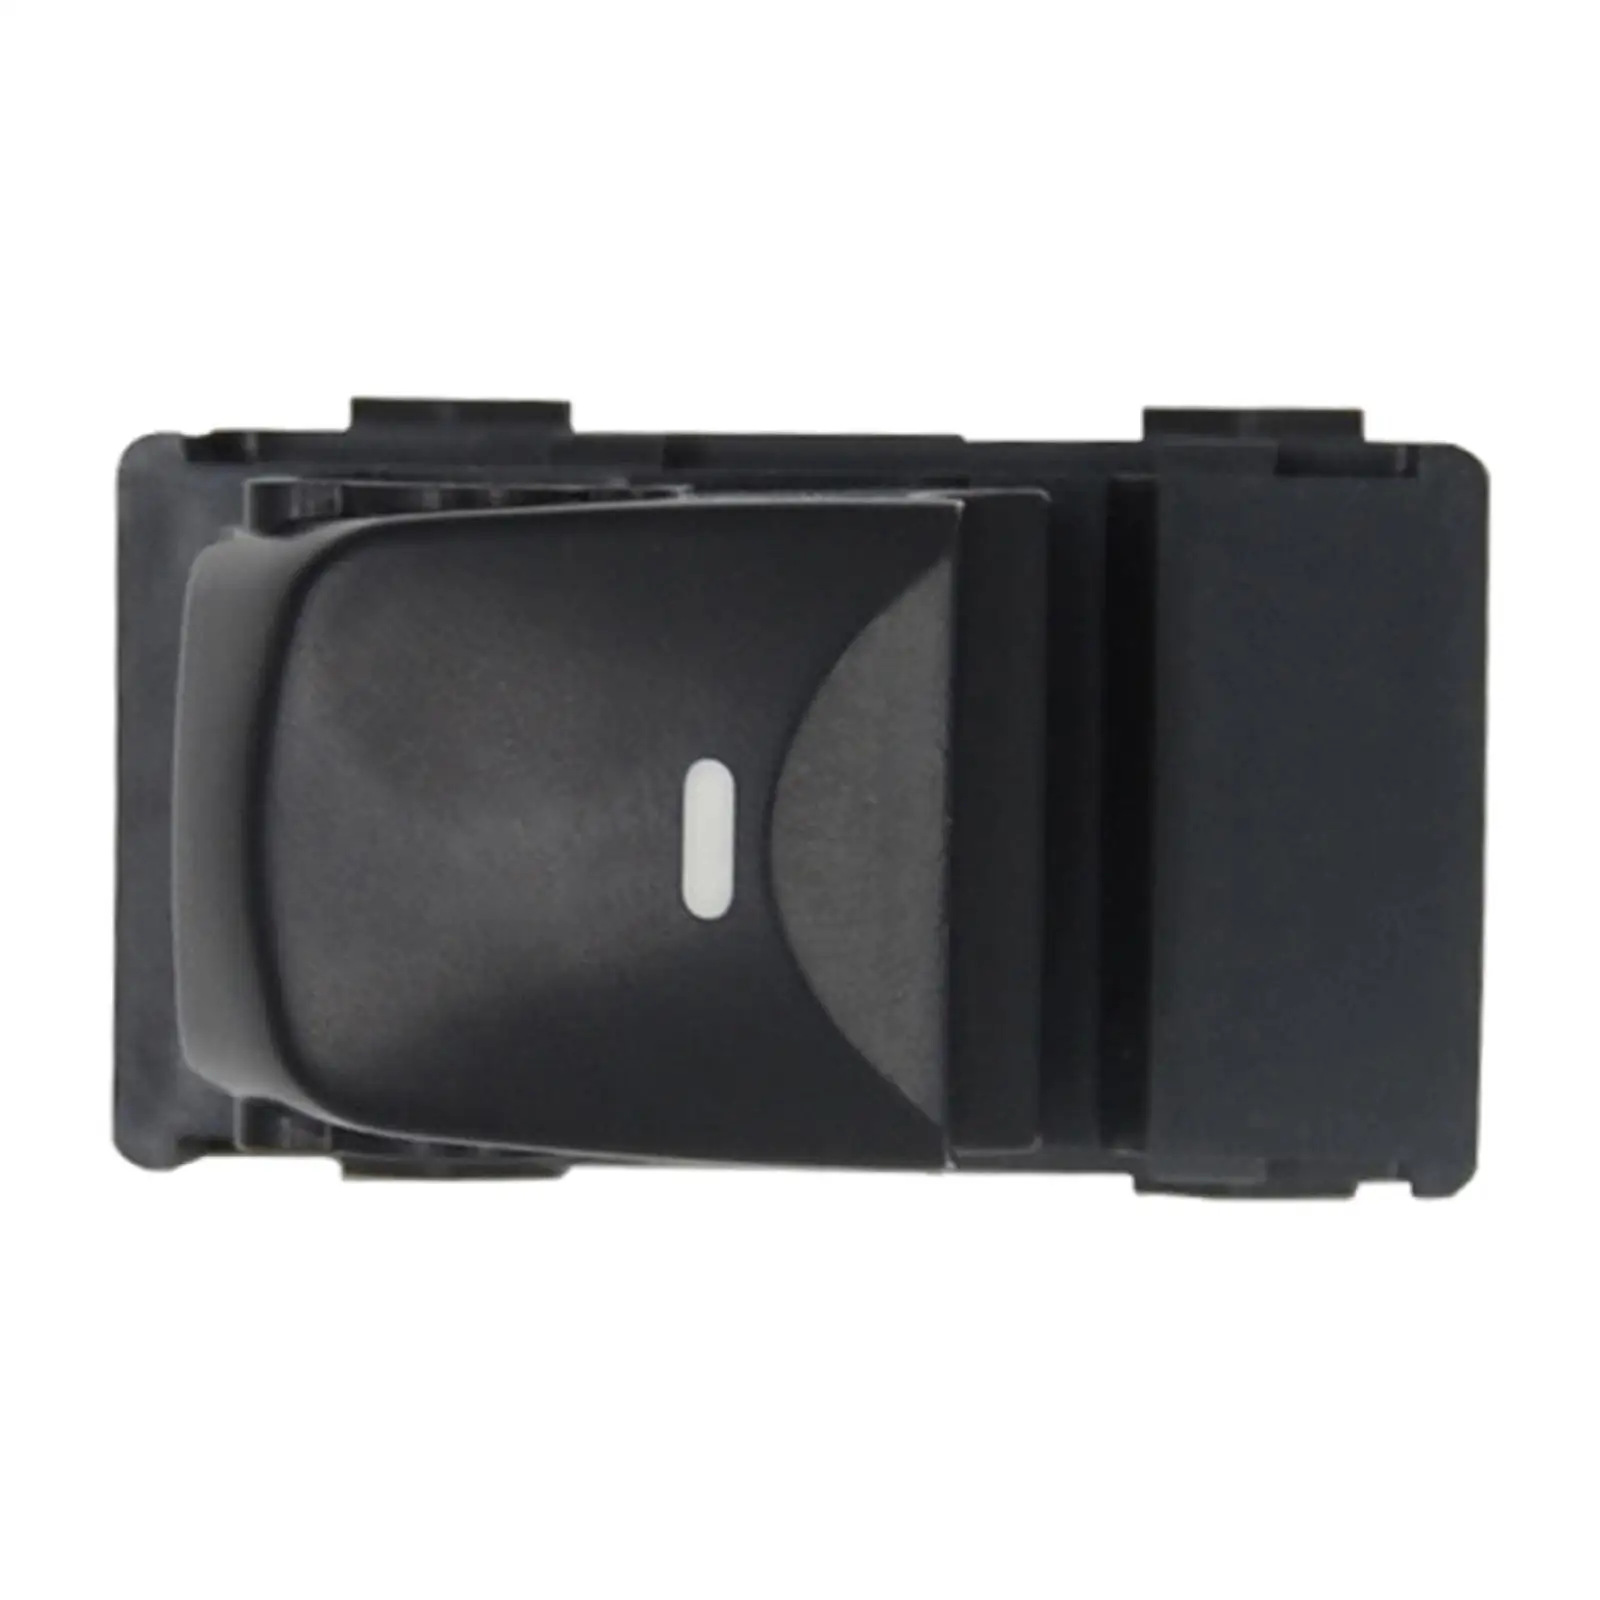 Master Power Window Switch 935803x010Ry Fits for Hyundai Elantra 11-13 Replaces High Performance